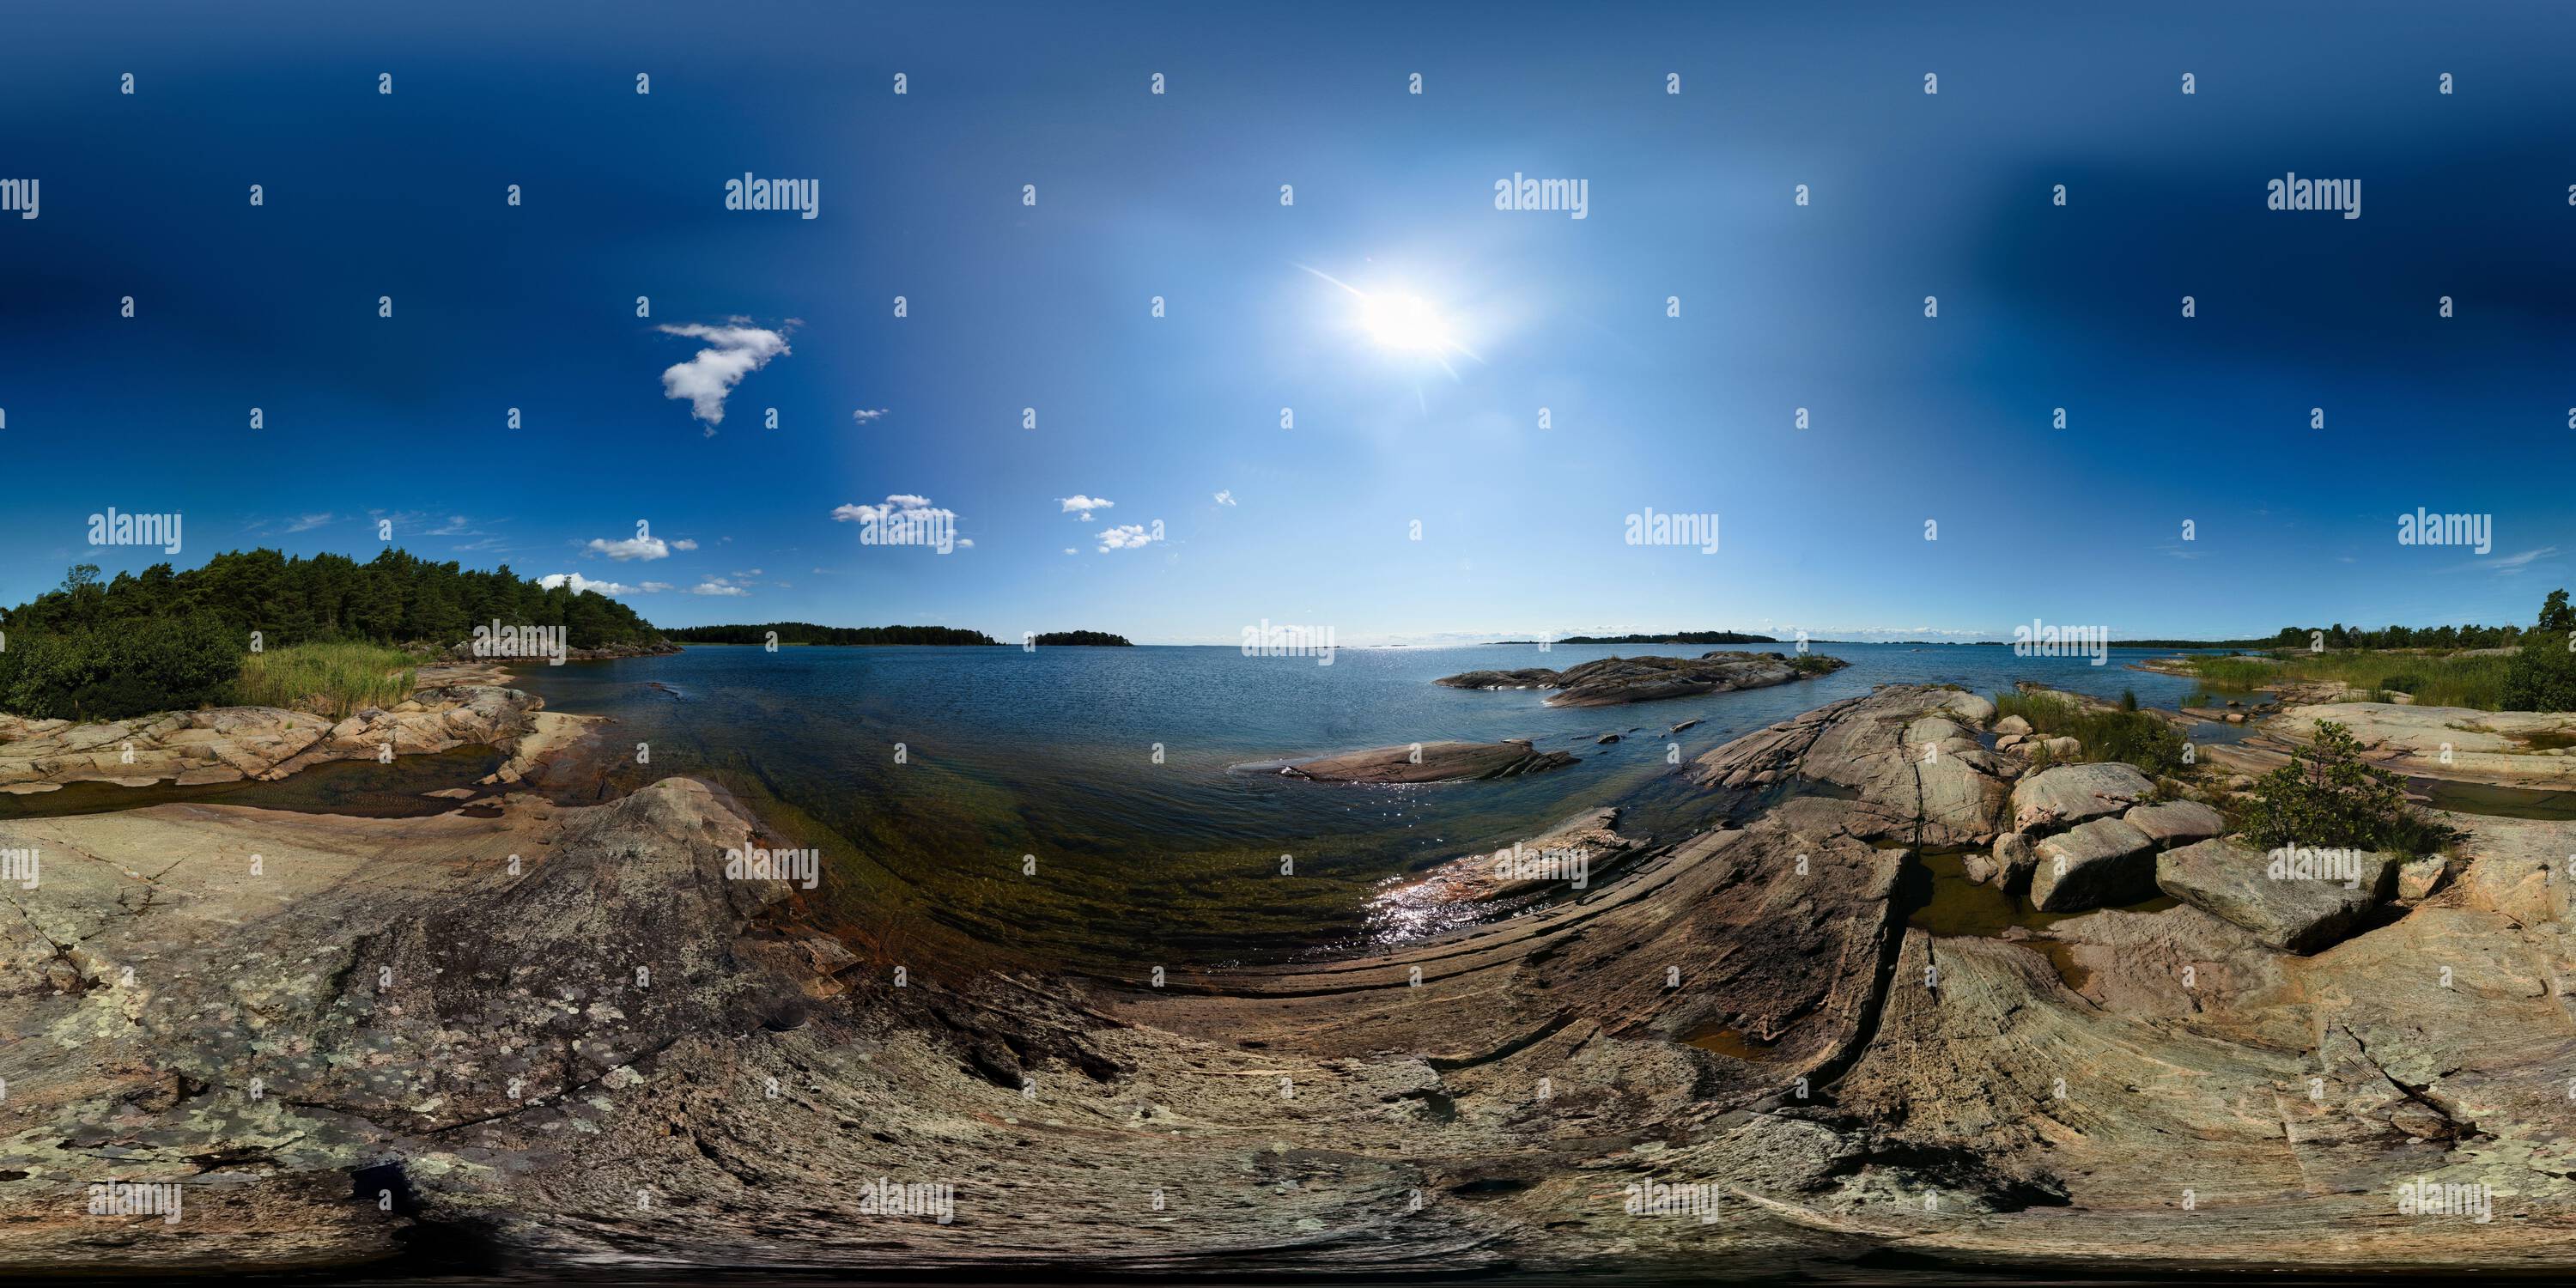 360 degree panoramic view of Spherical panorama of lakeside of Vanern in Sweden. Equirectangular projection is used, usable in most panorama viewers.